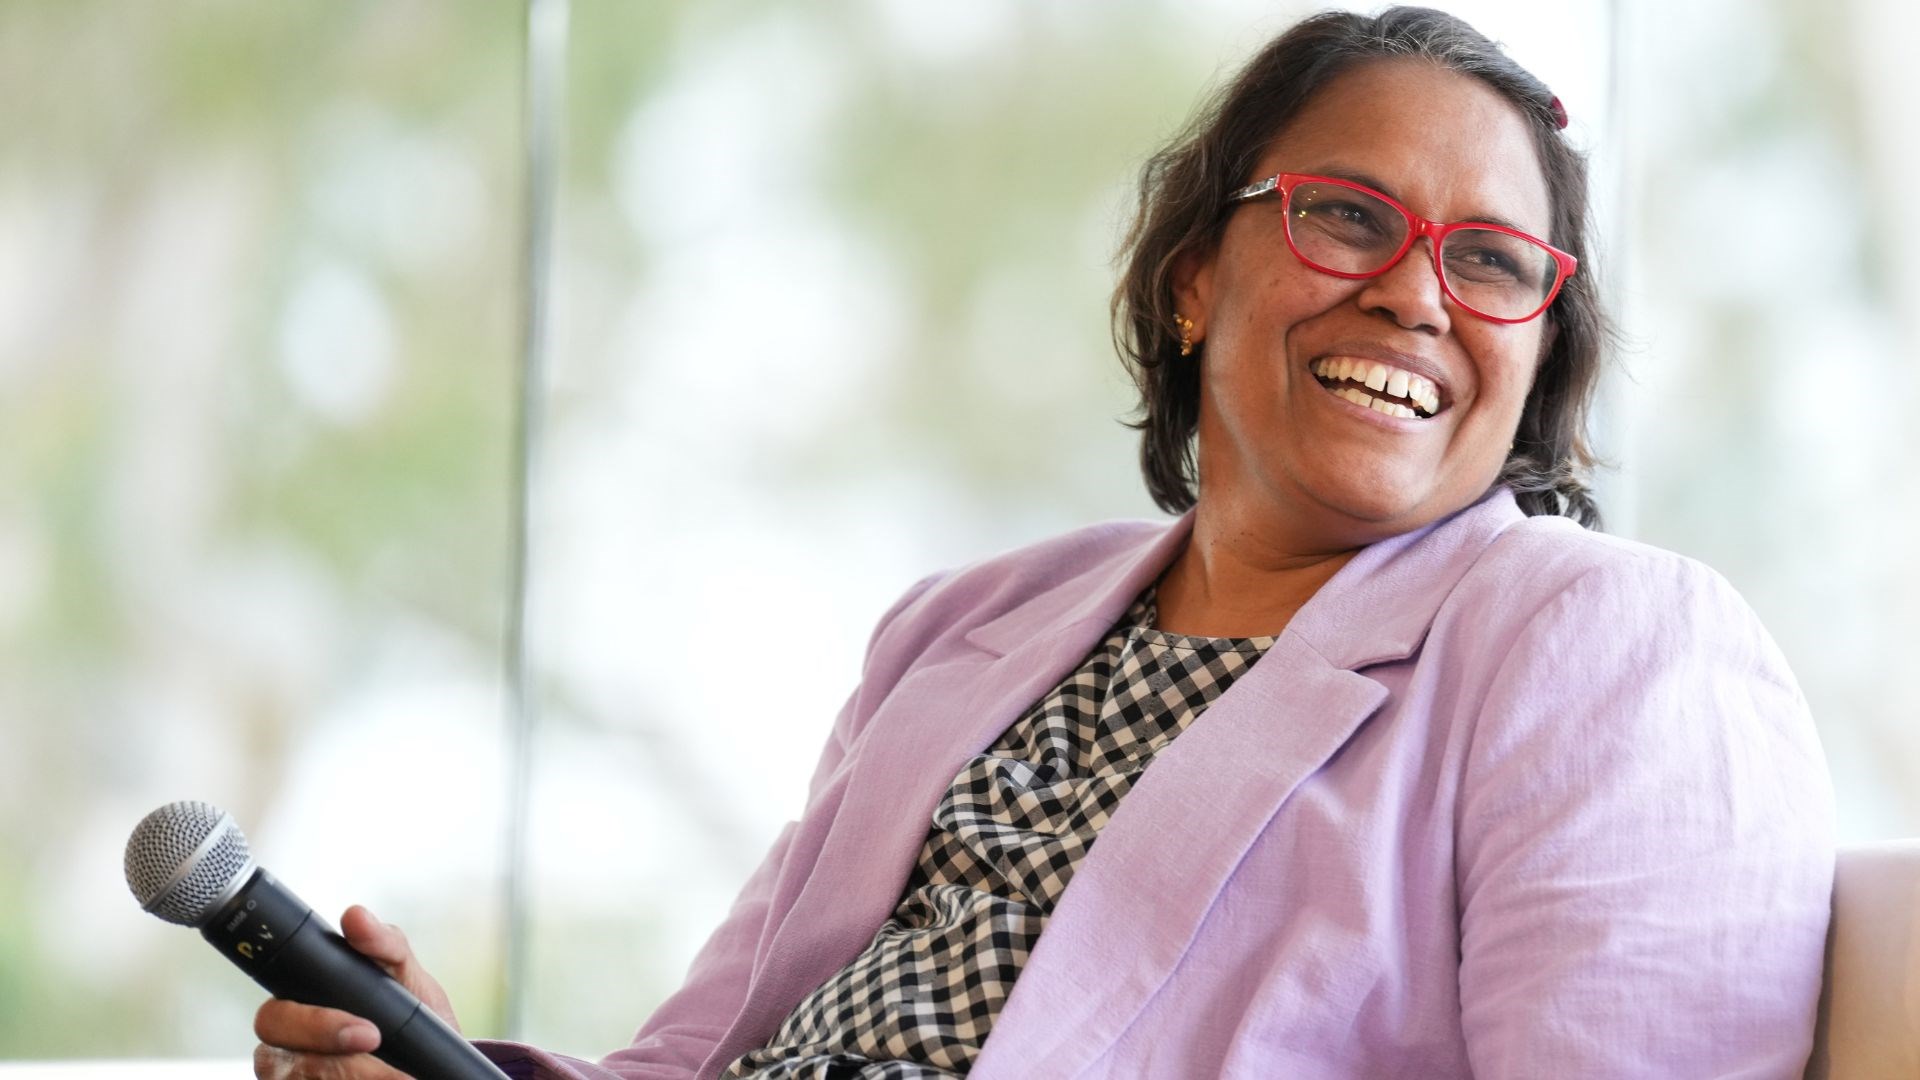 ‘Something Is In The Air’: Cathy Freeman’s Heartfelt Voice To Parliament Appeal